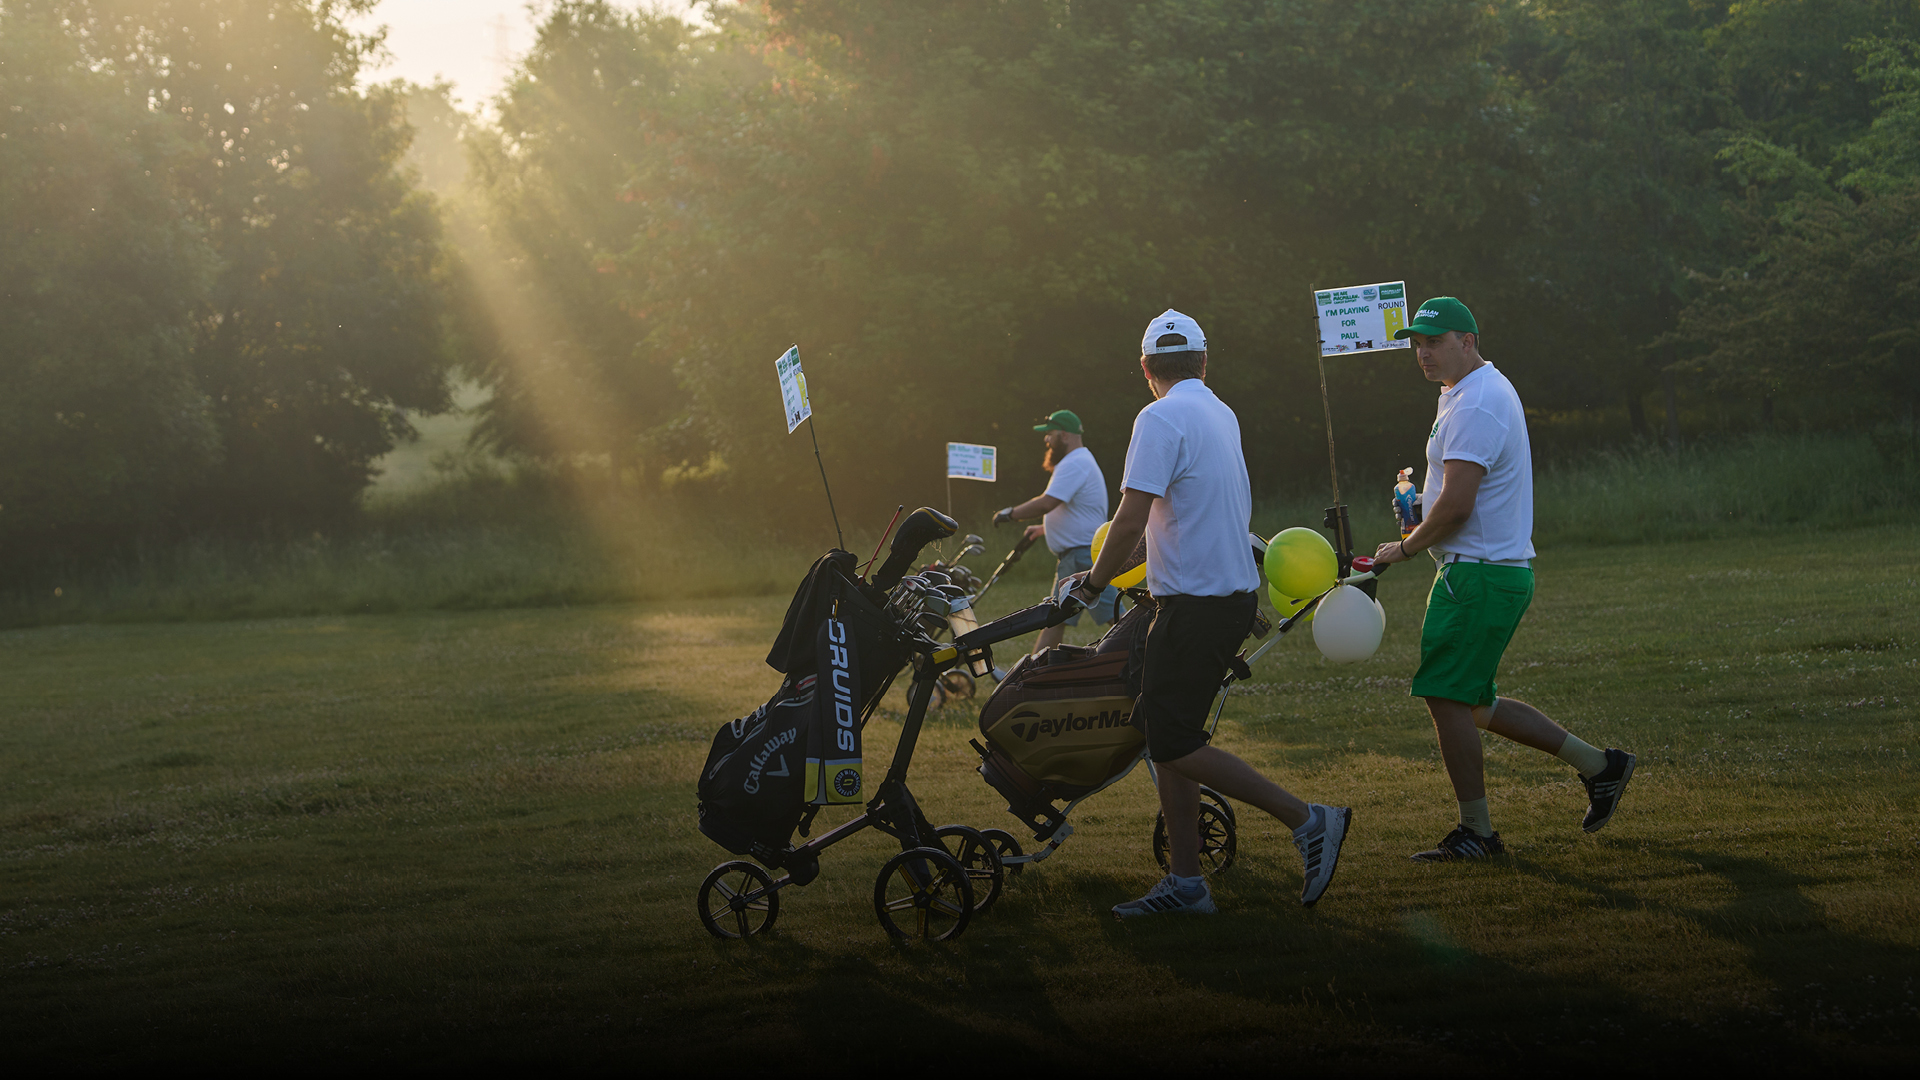 A group of people pushing a caddie on a golf course